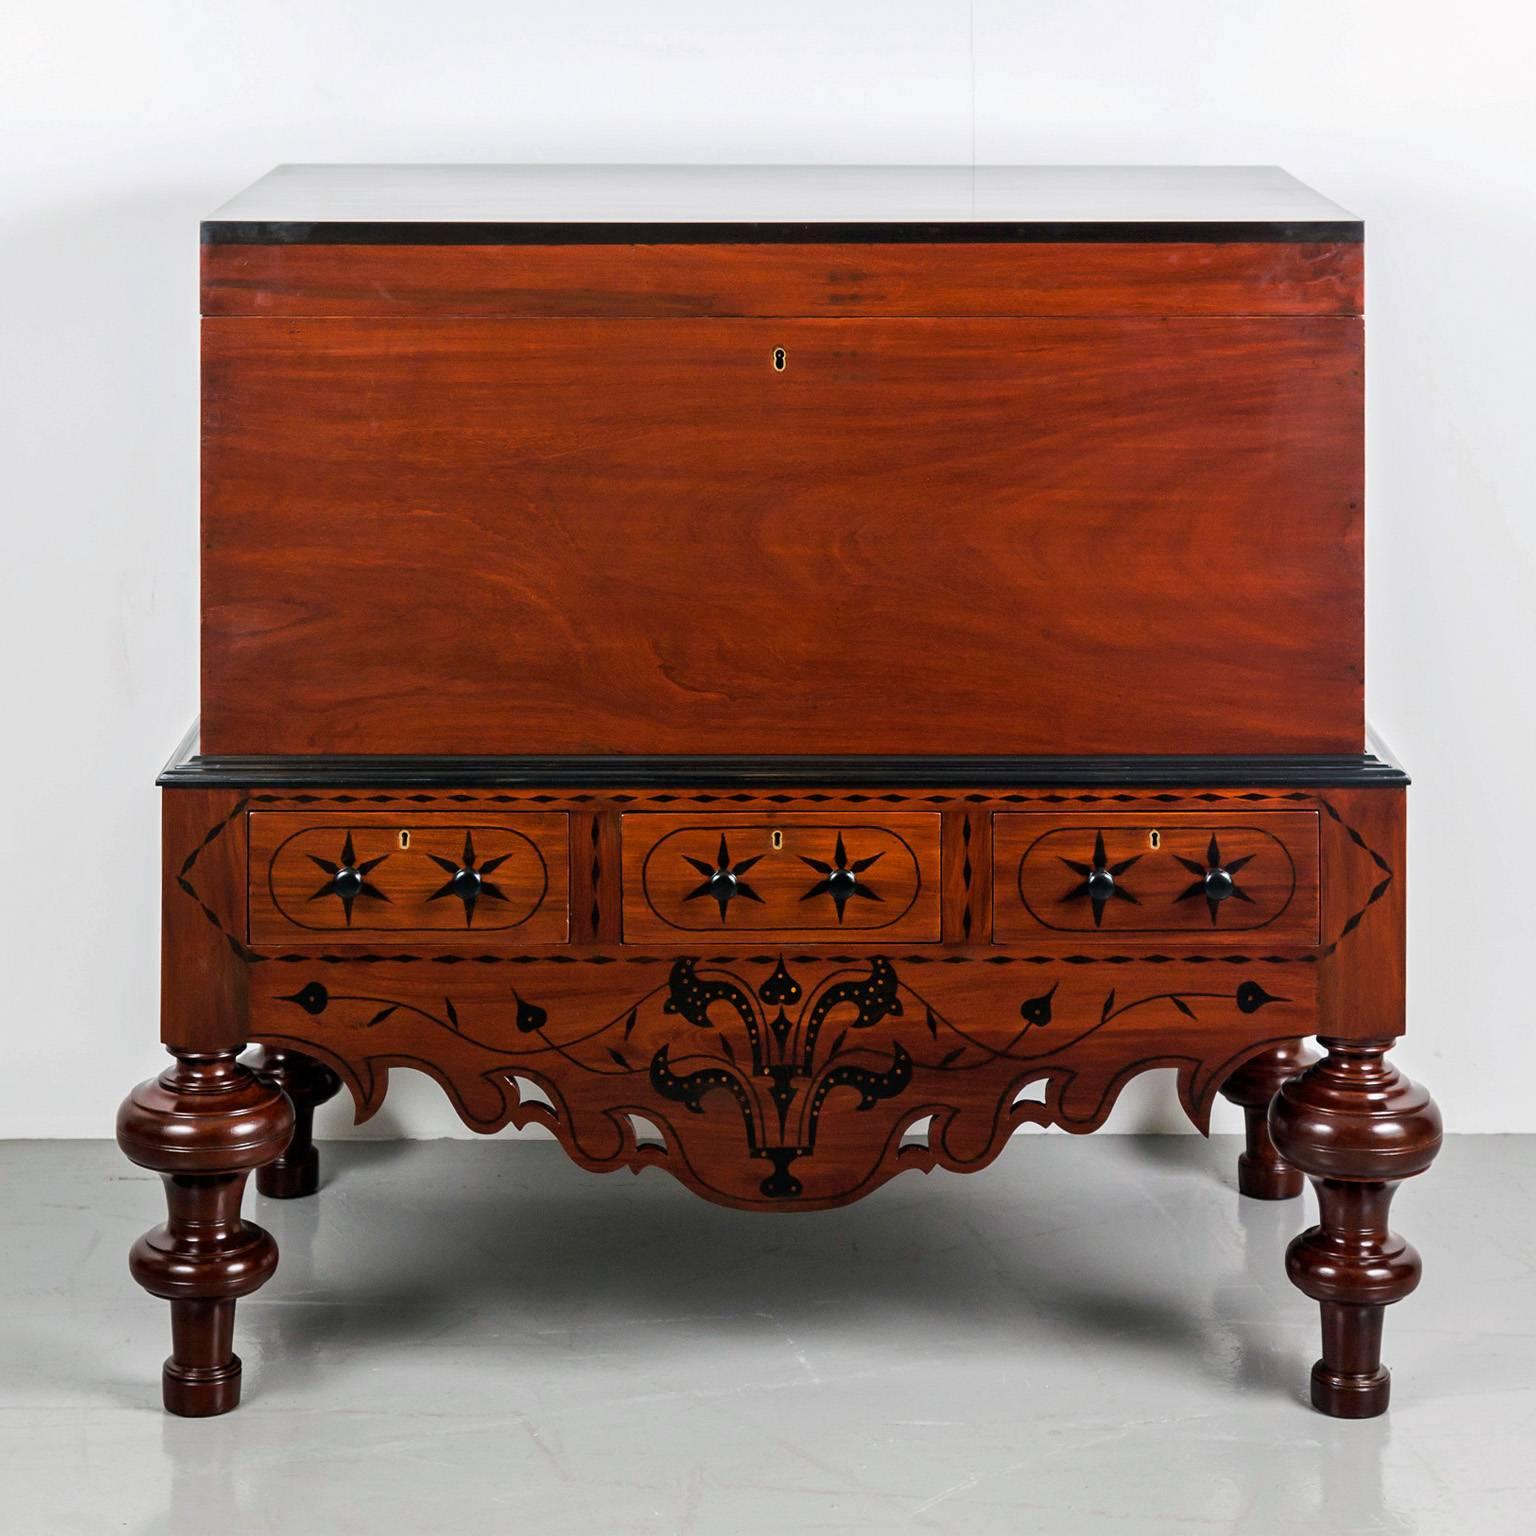 A typical Dutch colonial mahogany chest on stand of solid plank construction. The hinged cover with a molded ebony edge opens to a plain interior. 
The chest rests on a stand with a deep apron, the short sides and back are rectangular. The front